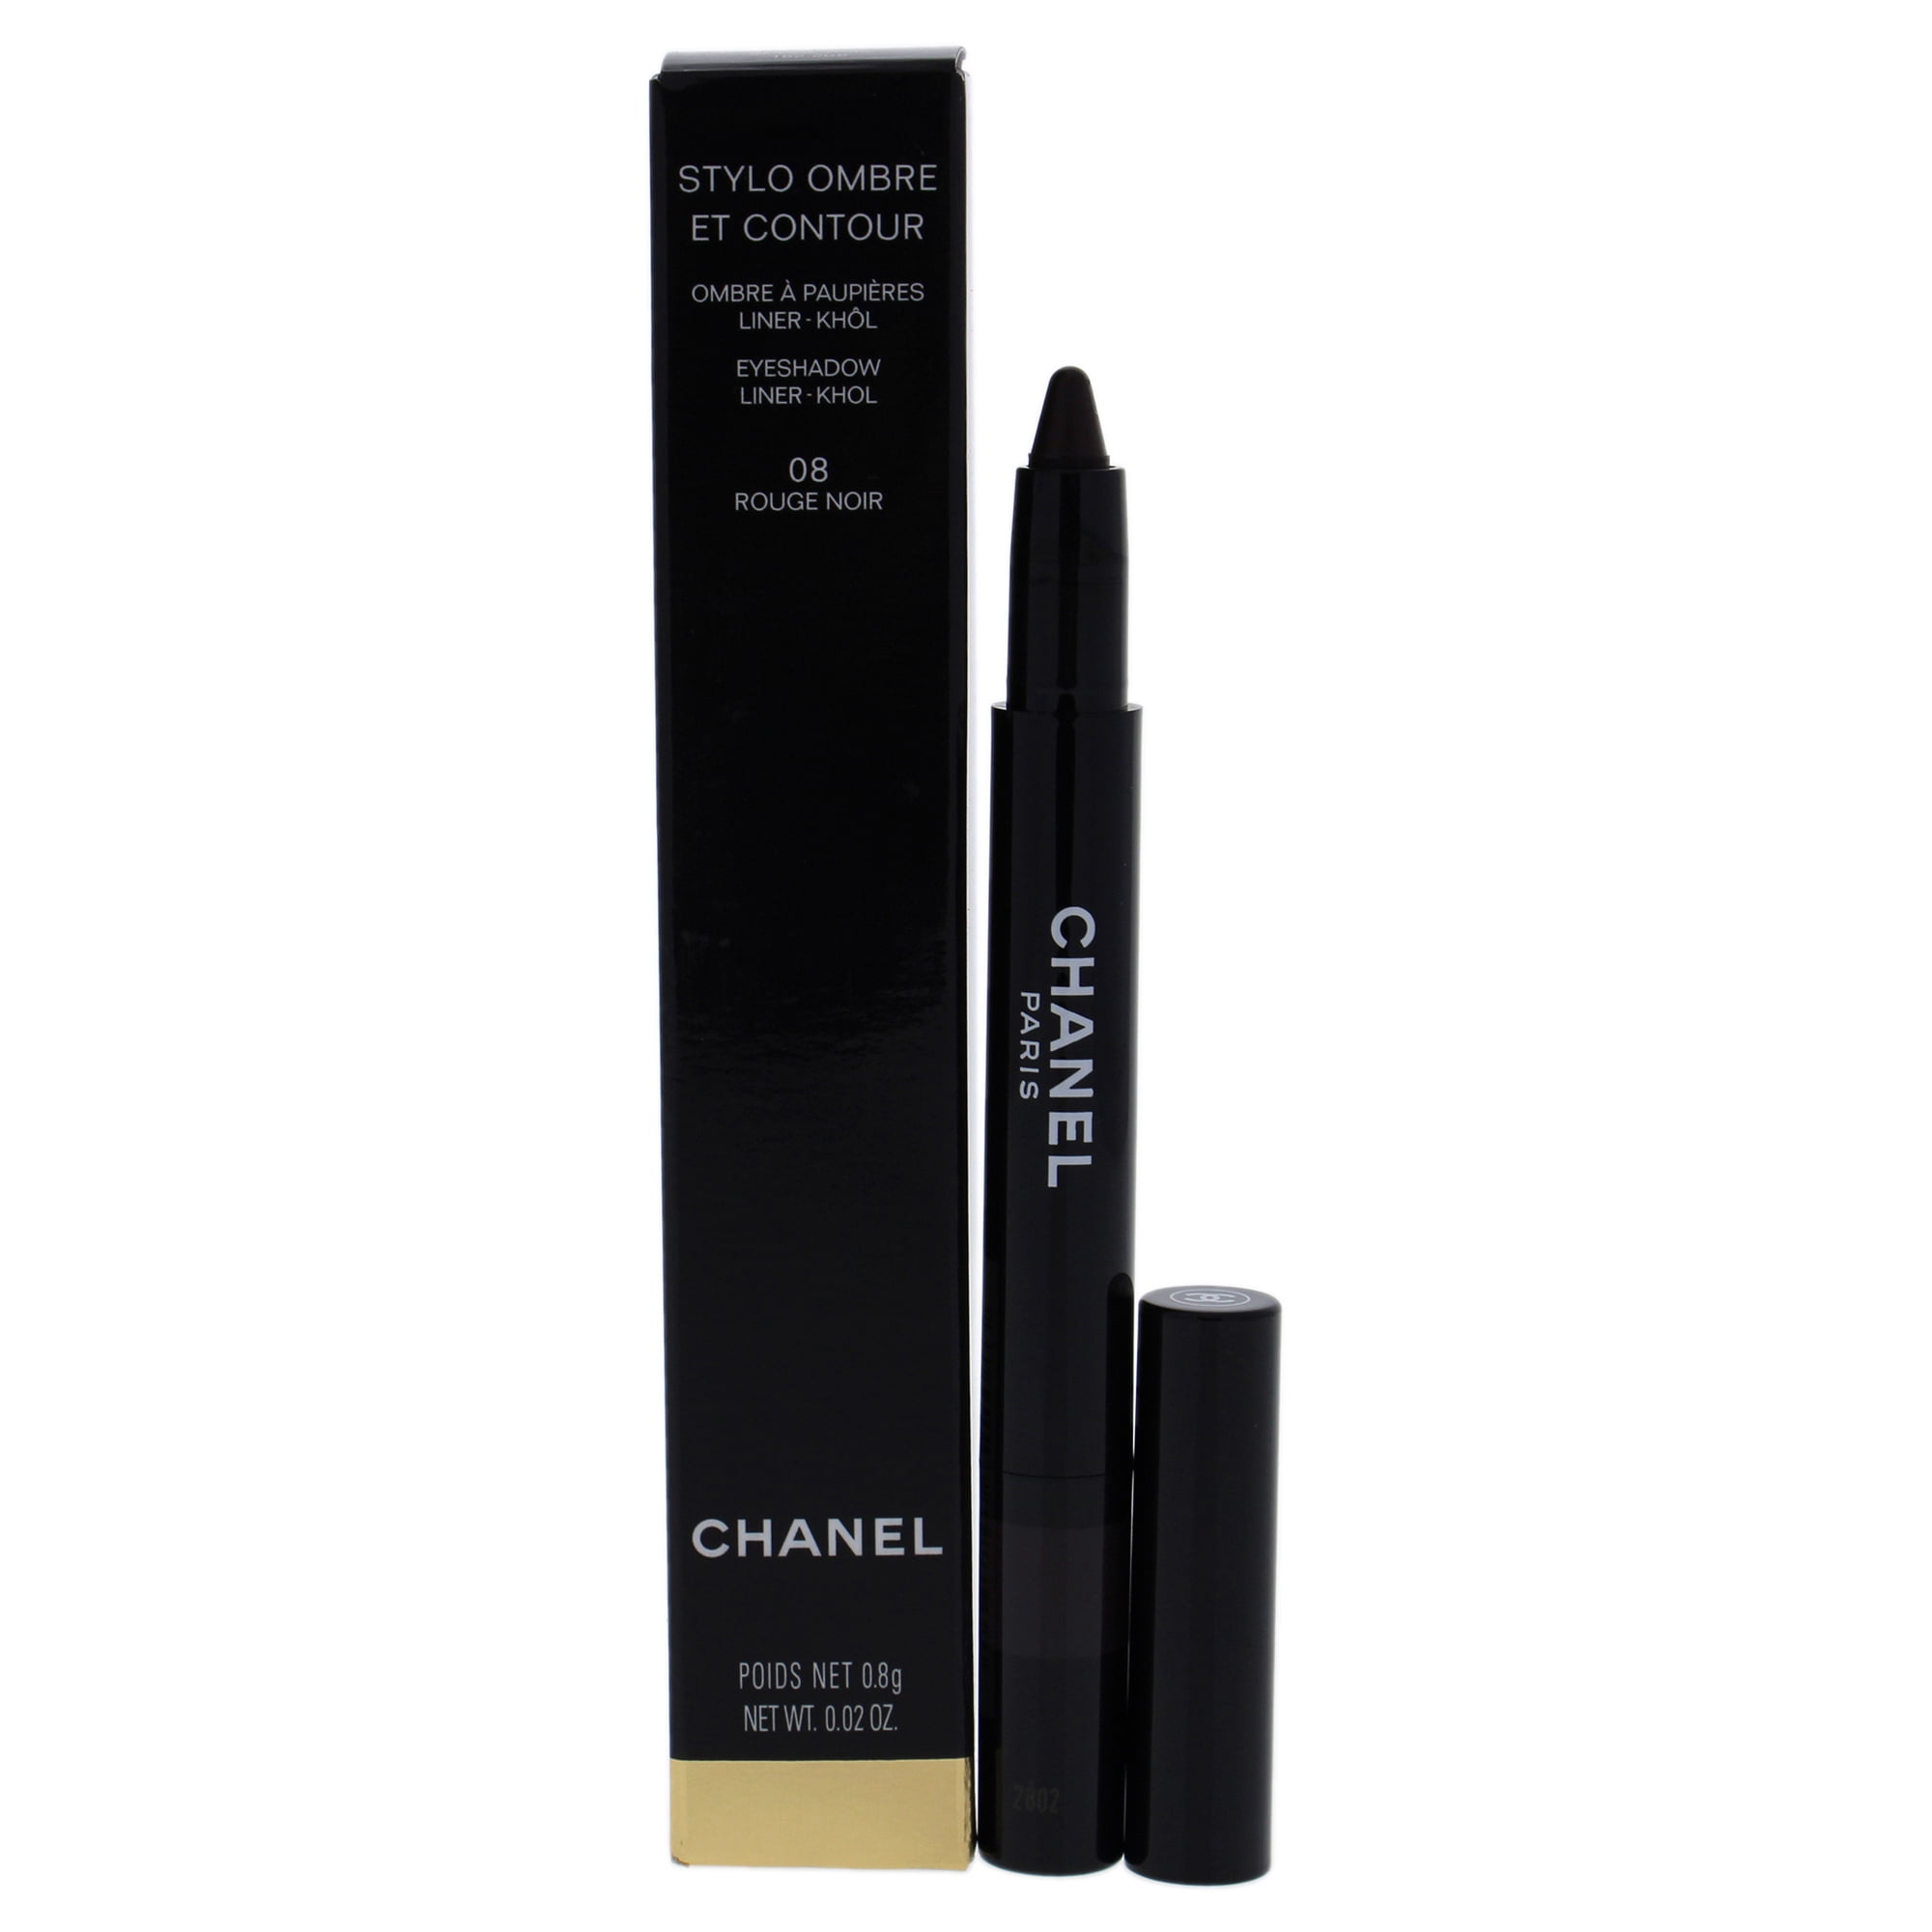 Stylo Ombre et Contour - 08 Rouge Noir by Chanel for Women - 0.27 oz Eye  Shadow